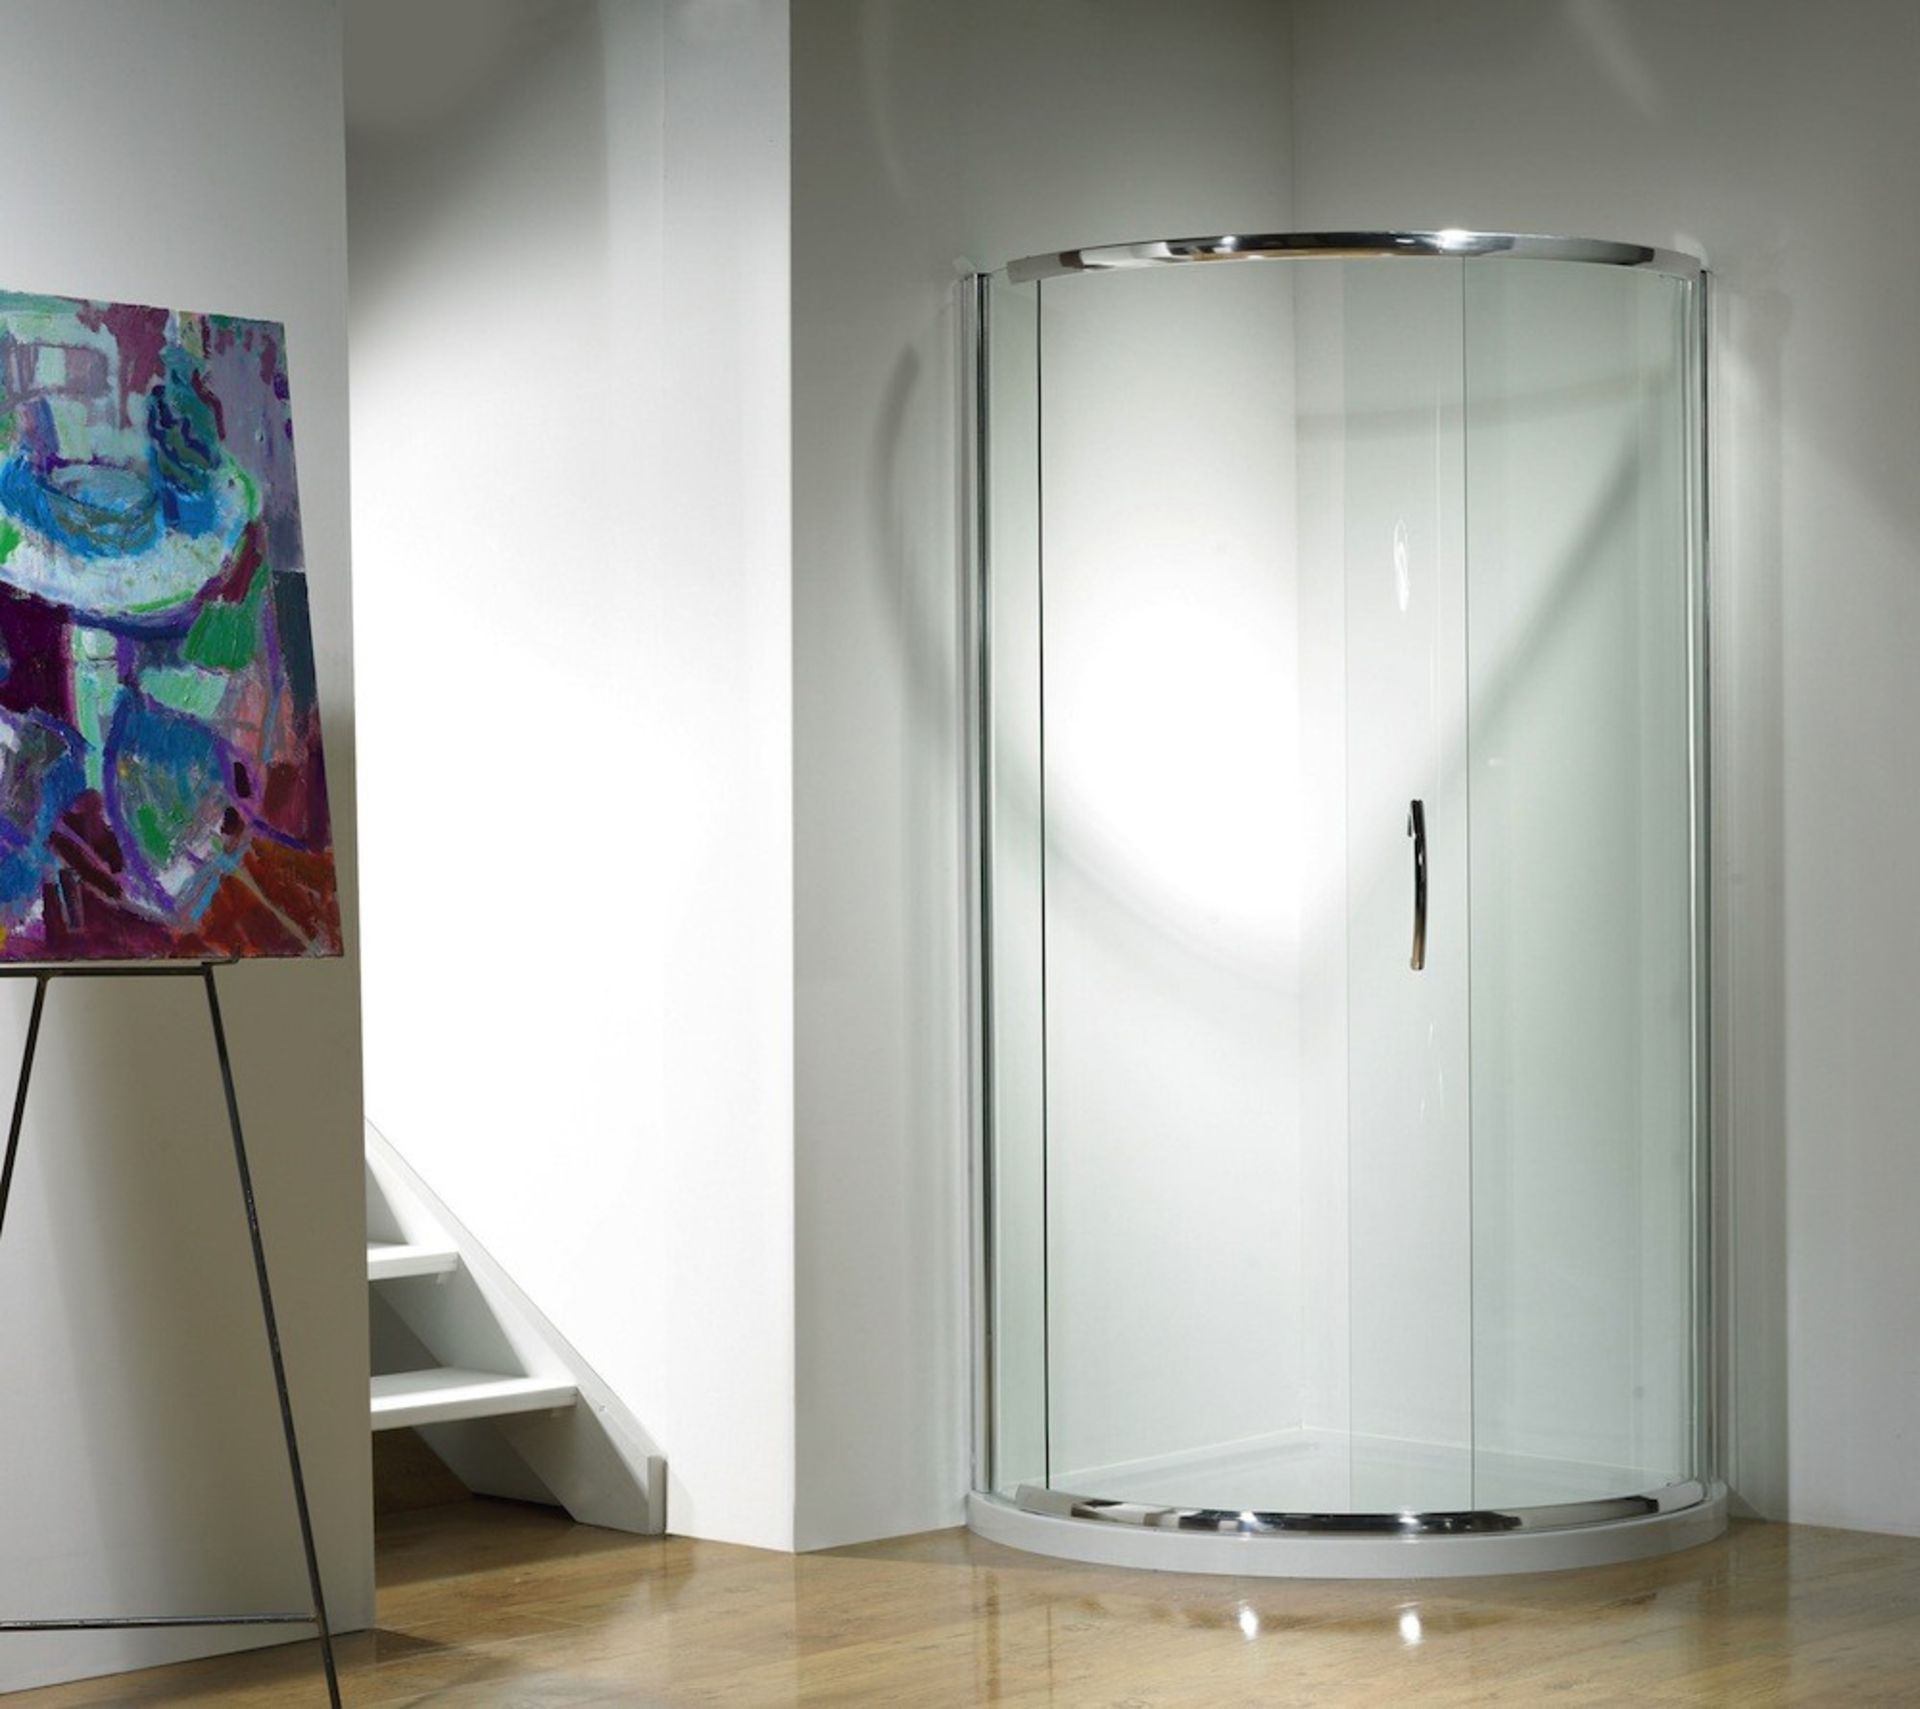 1 x Synergy Bathrooms Single Curved Door Quadrant Shower Enclosure - Chrome Framed With Clear